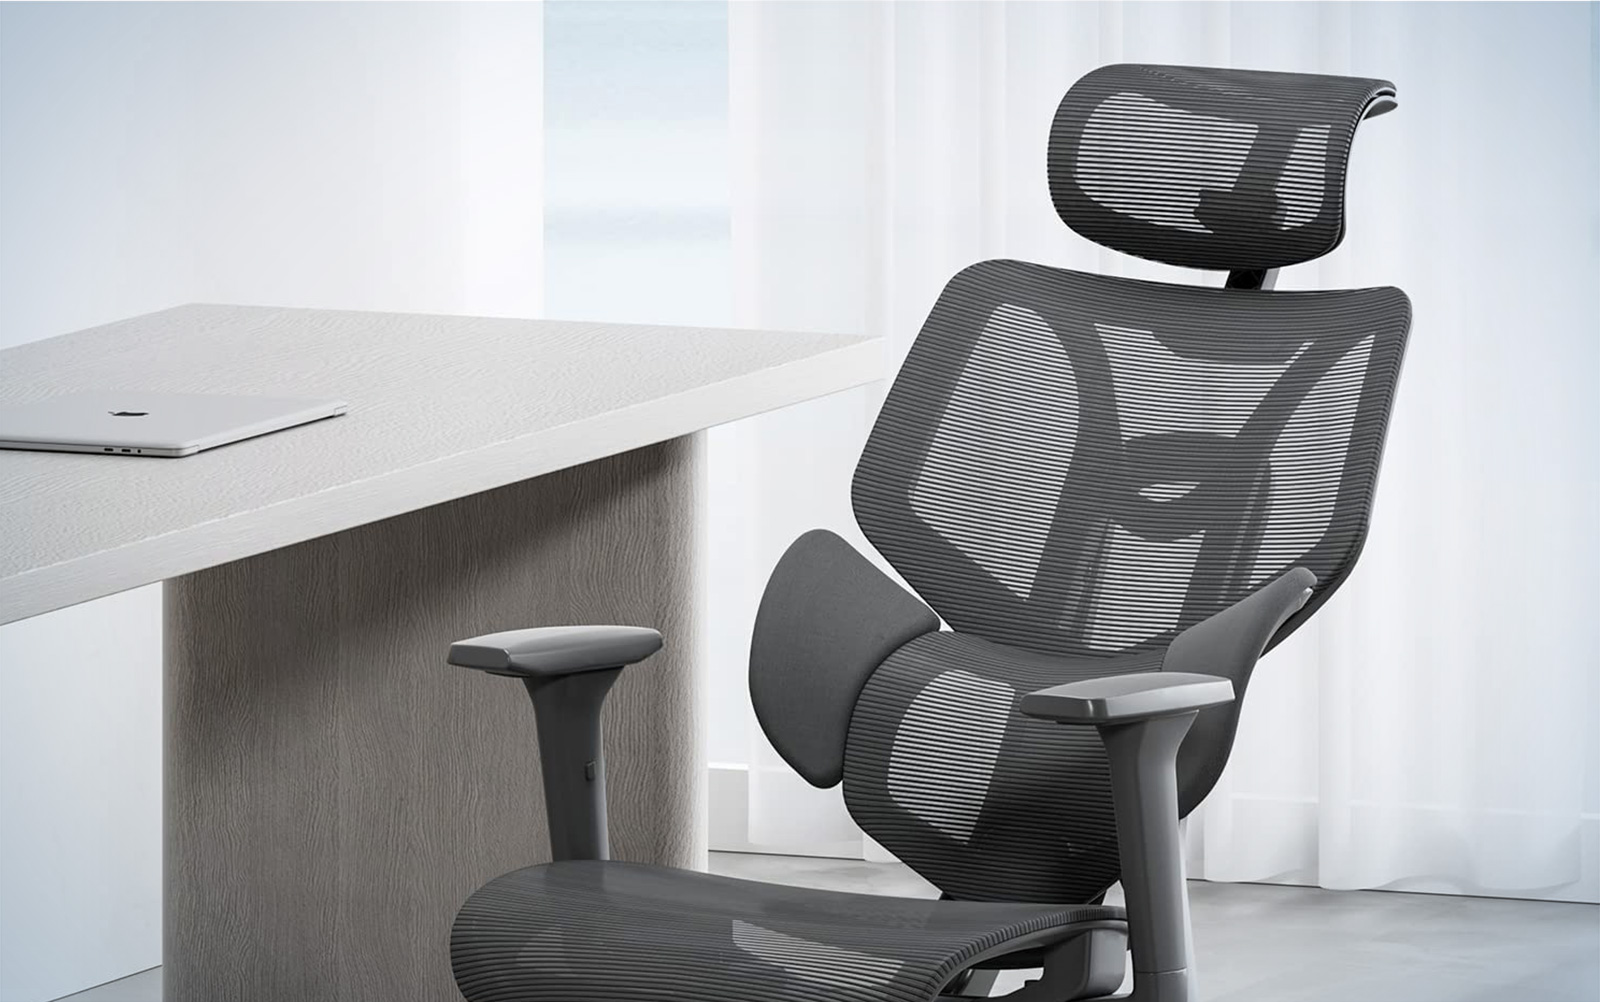 Top 5 Office Chairs for Back Support 